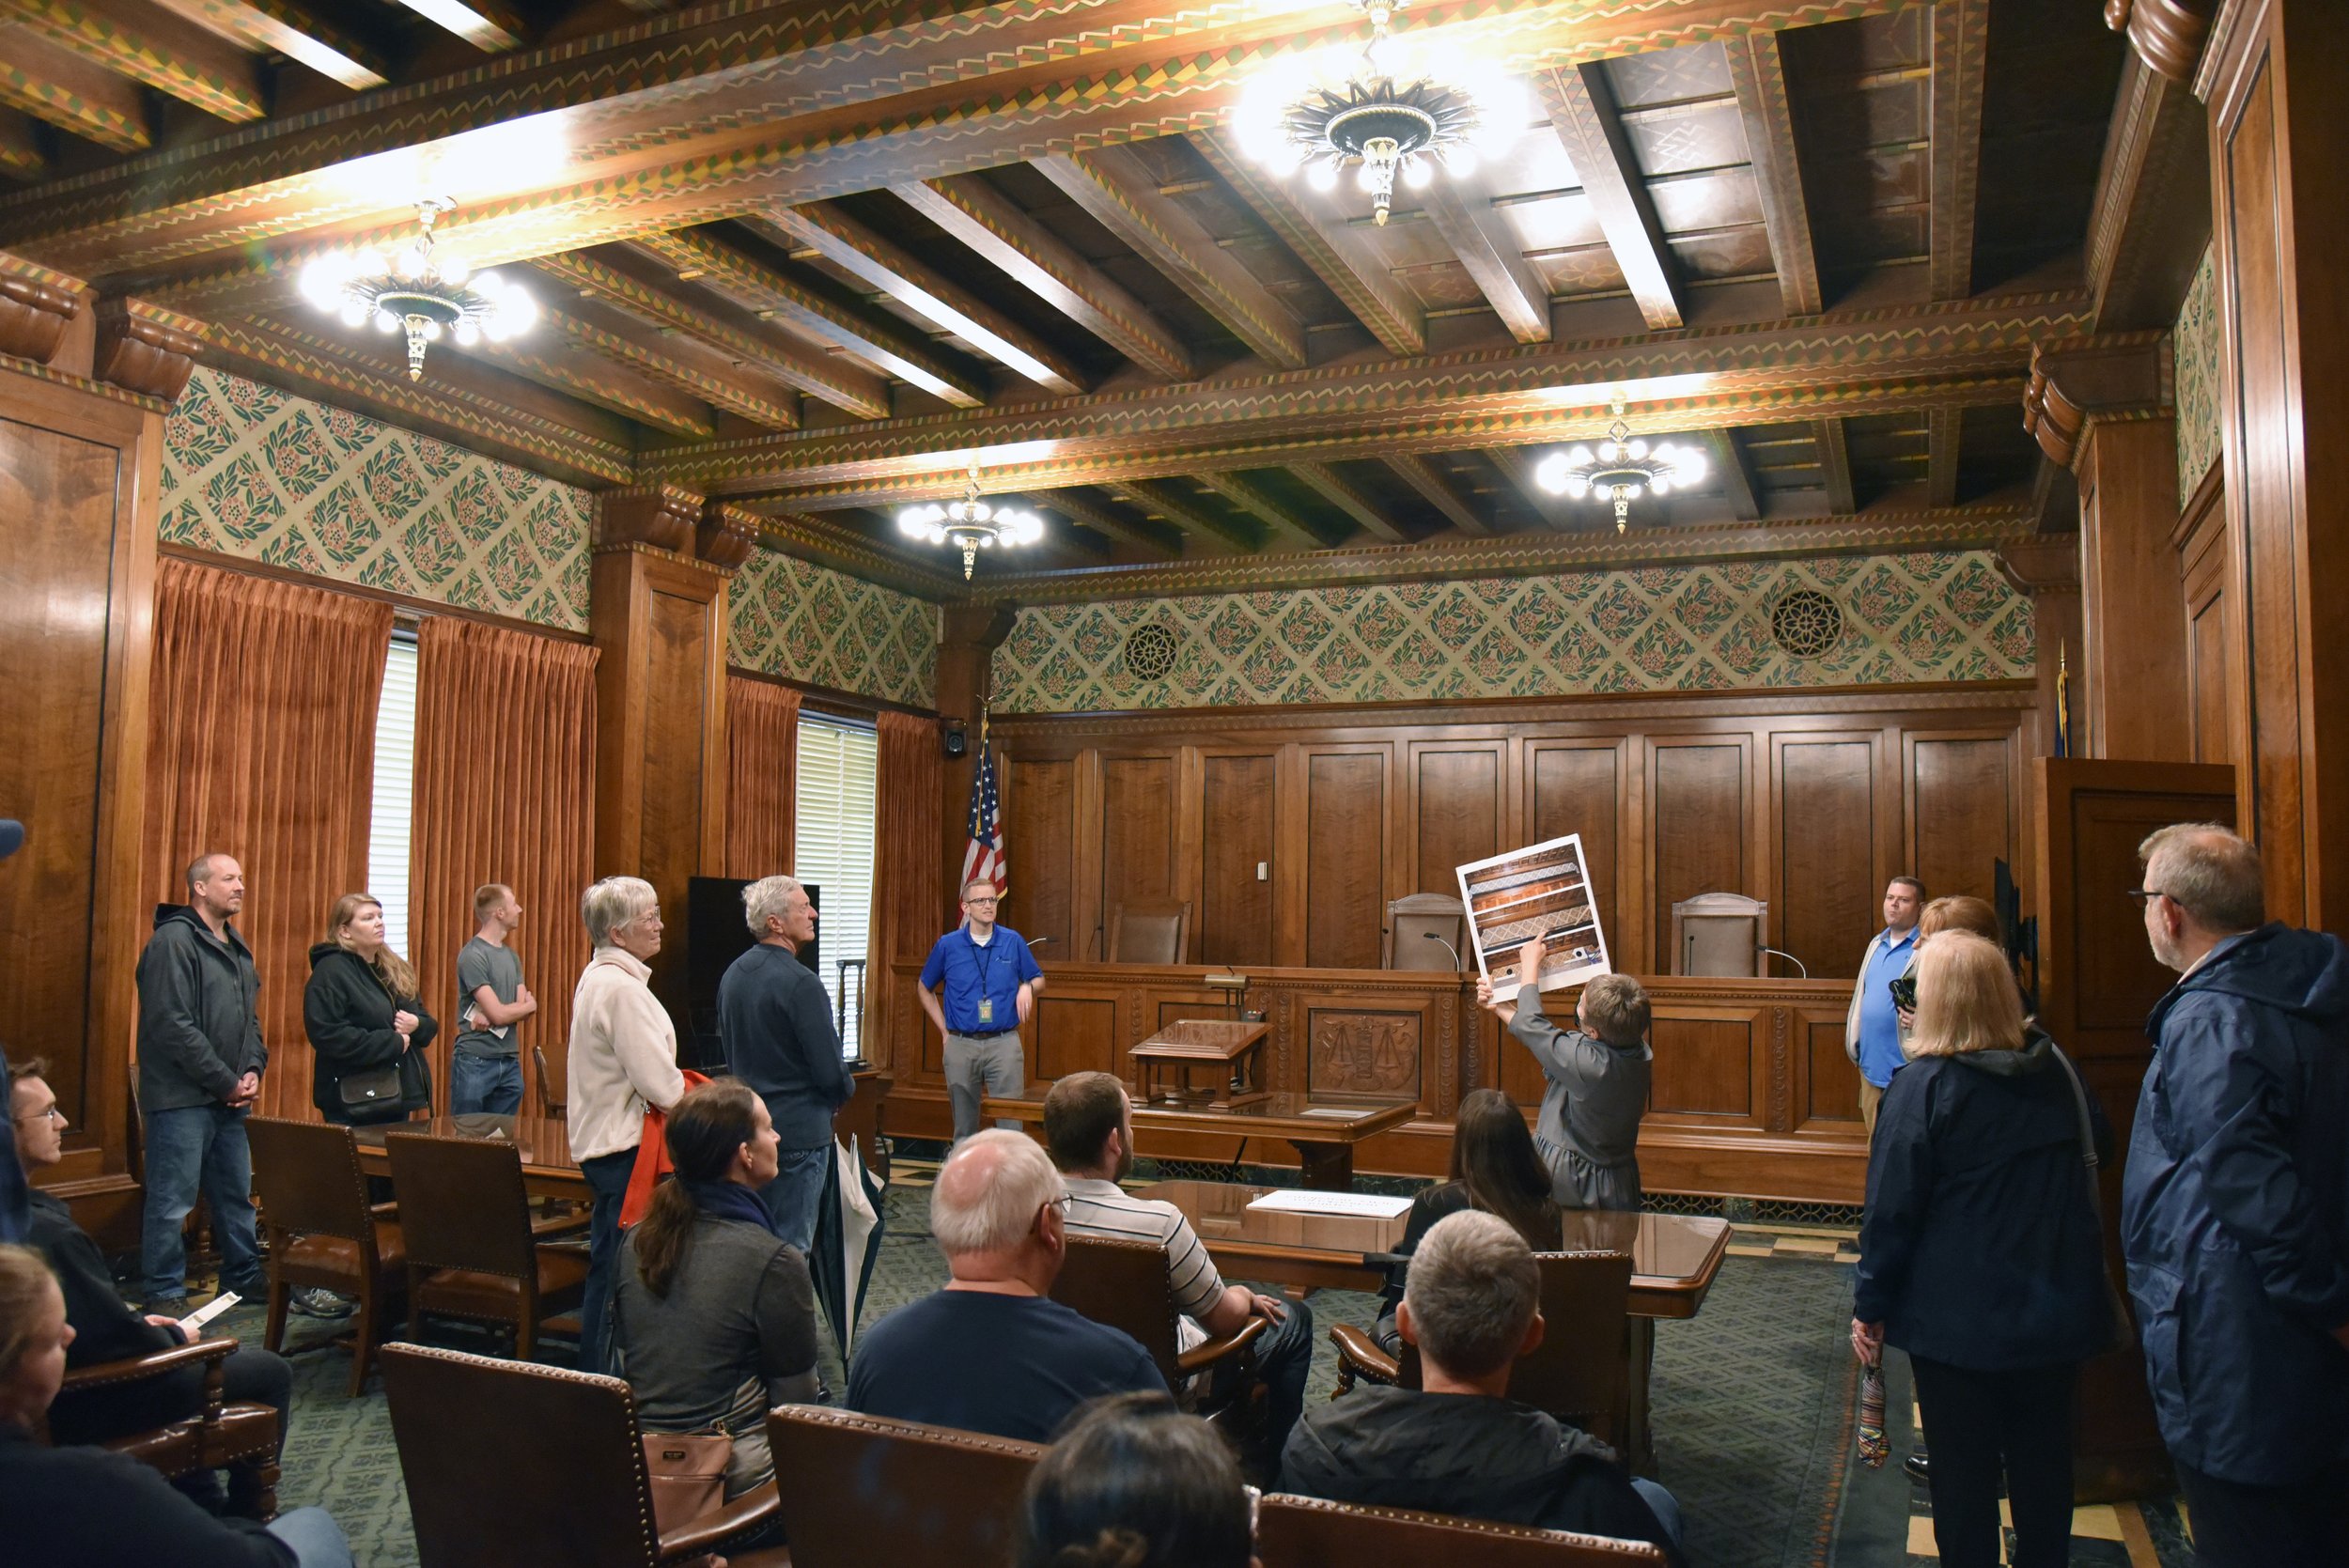  Capitol Tourism Supervisor Roxanne Smith points to a photograph of the heating and air-conditioning registers that existed high on the walls of the Court of Appeals Chamber before the new HVAC system was installed and the room meticulously restored.